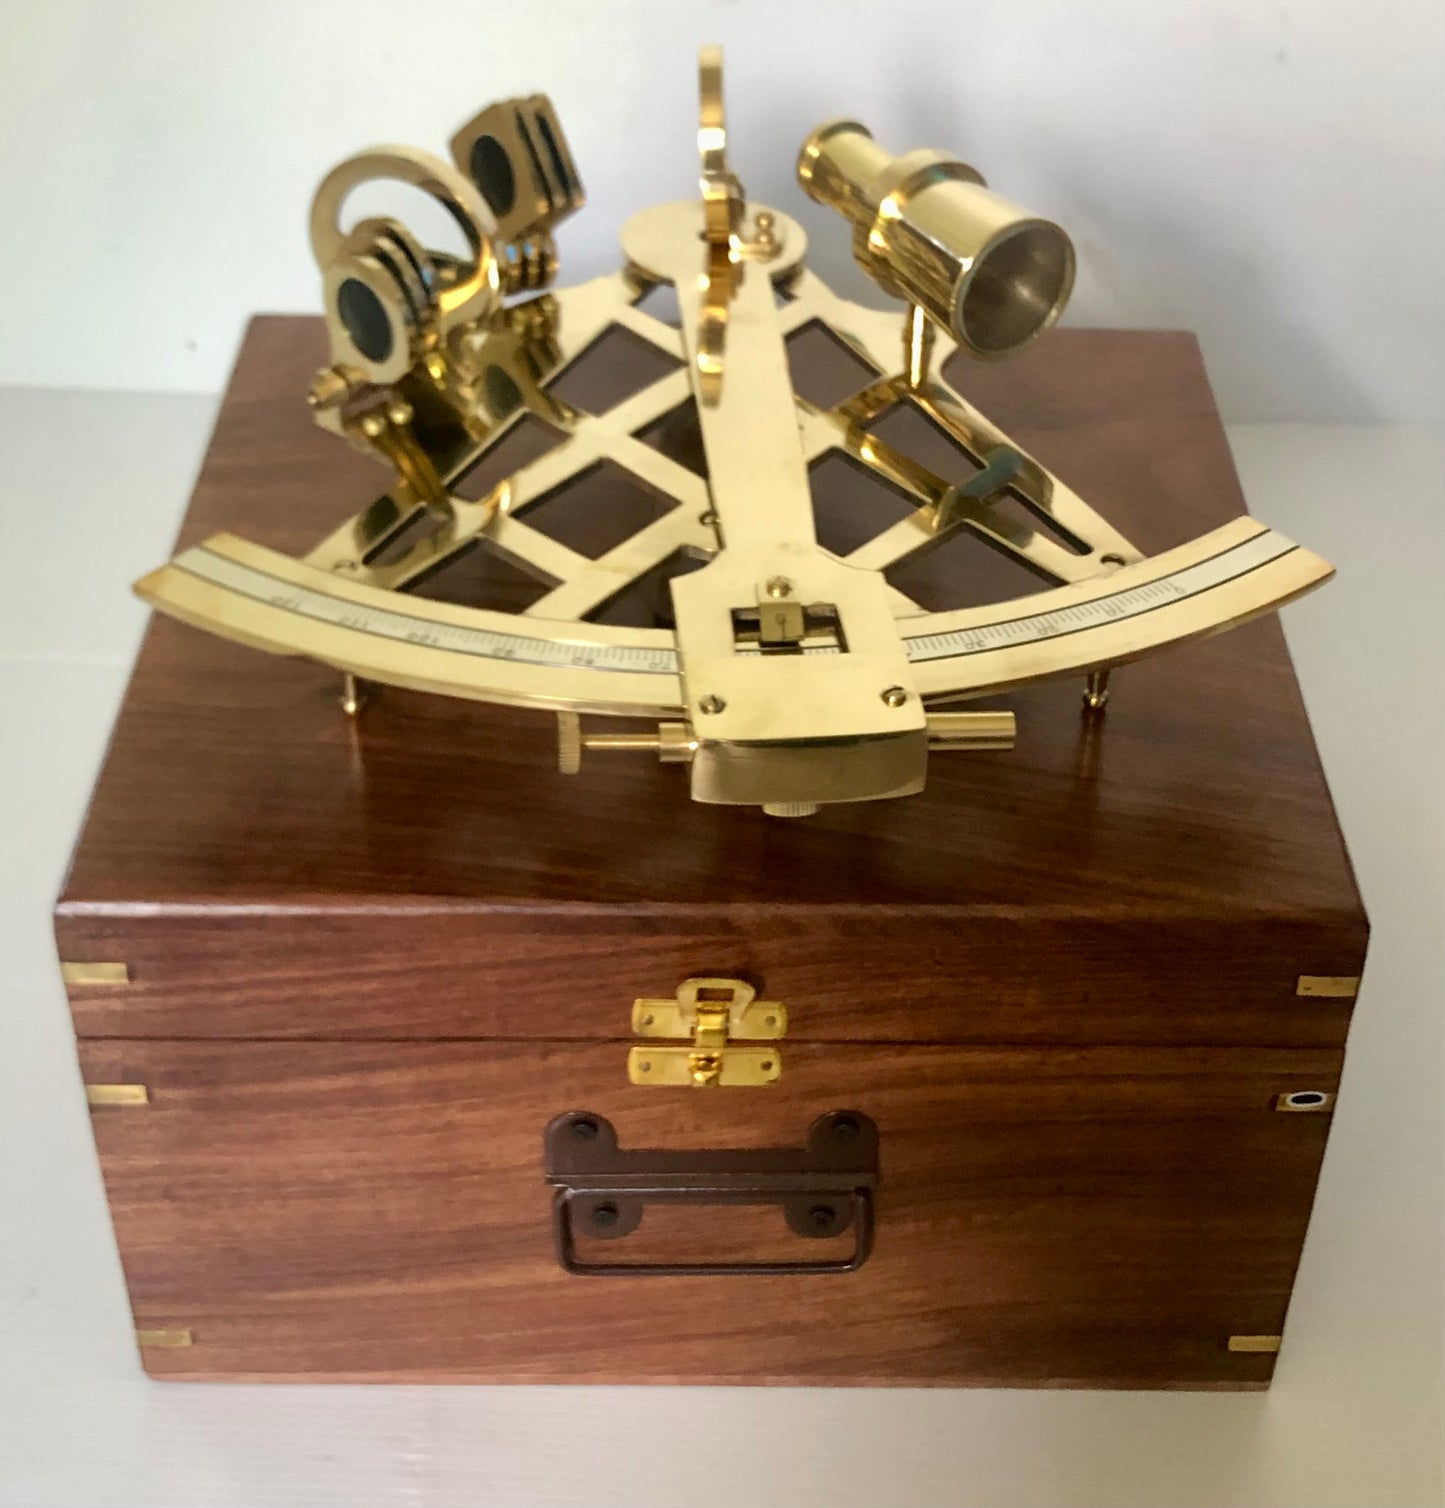 10” Sextant with Box (Shiny)